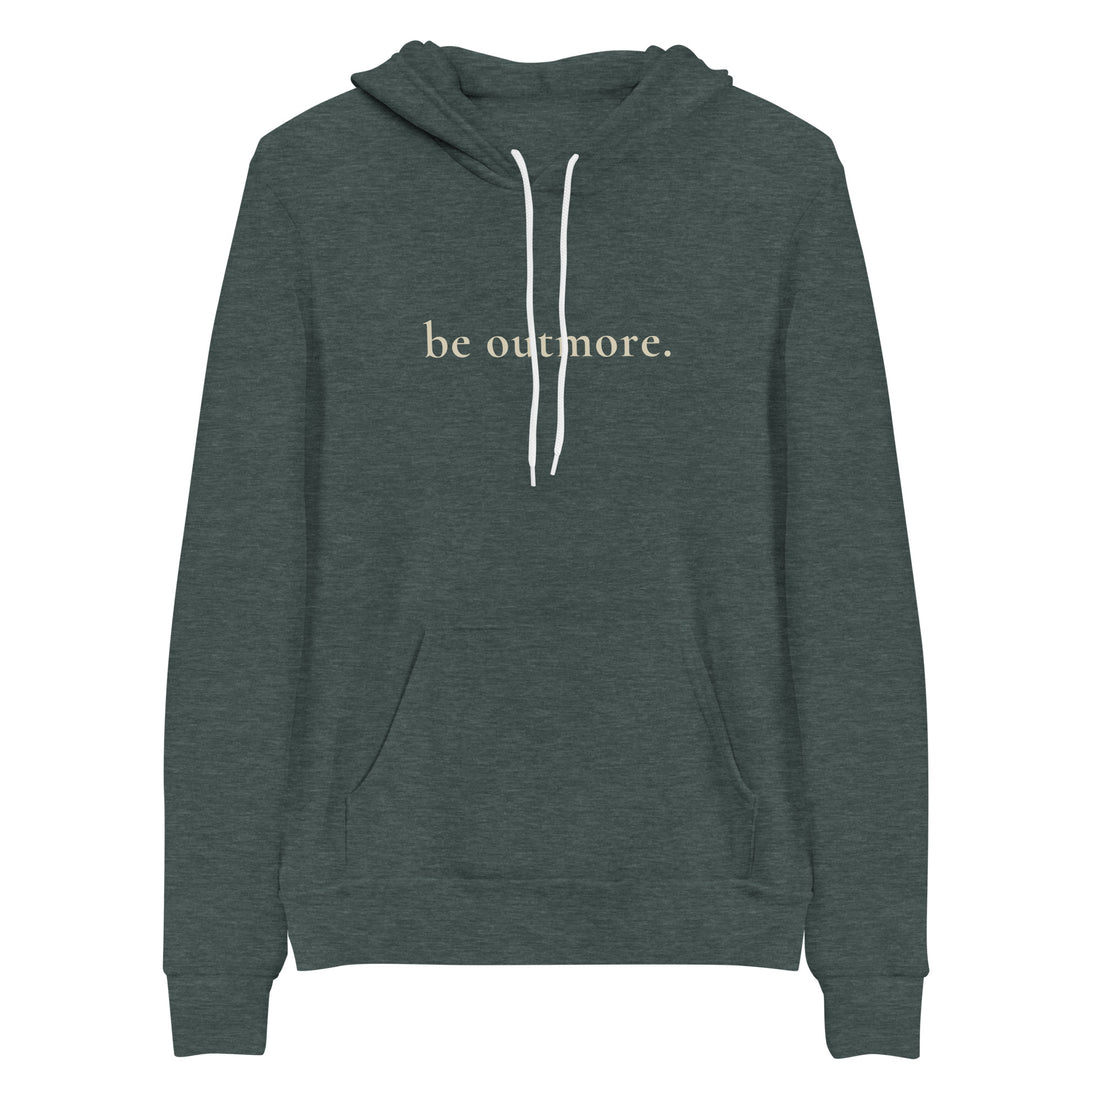 be outmore. Hoodie #color_heather-forest